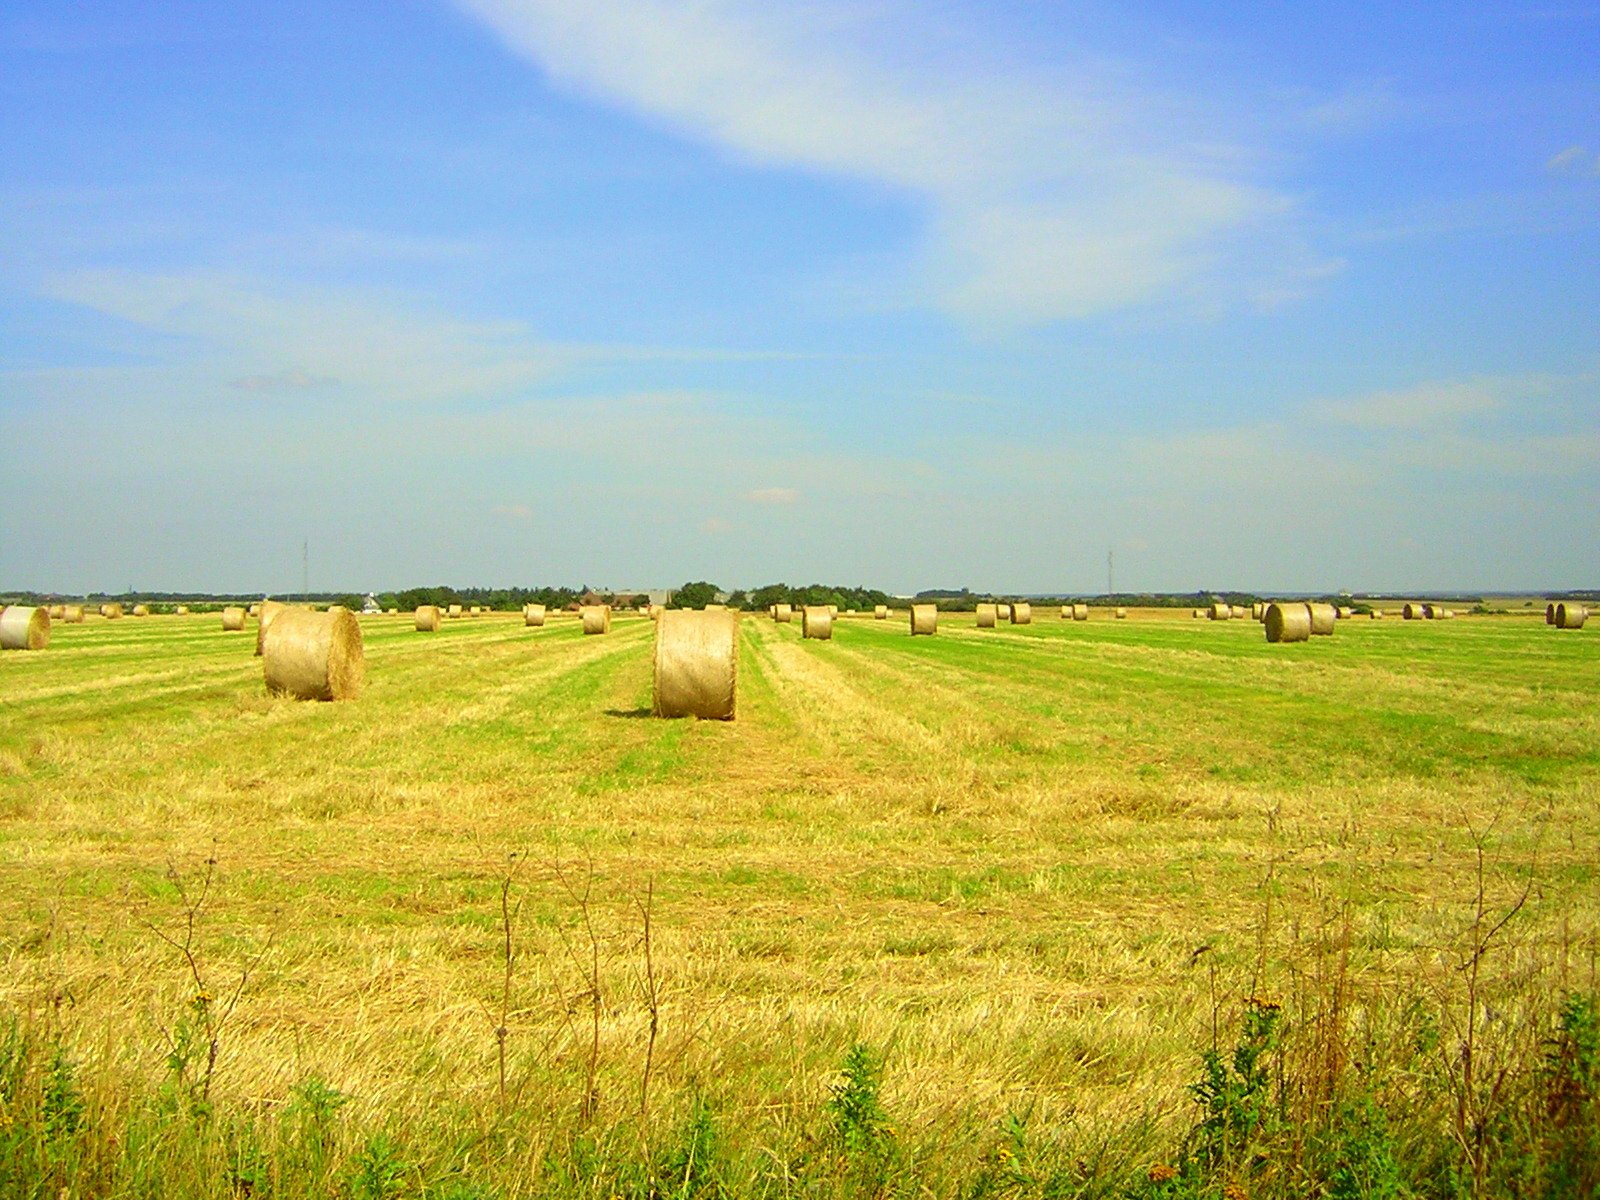 hay bales in a field with the sky and grass